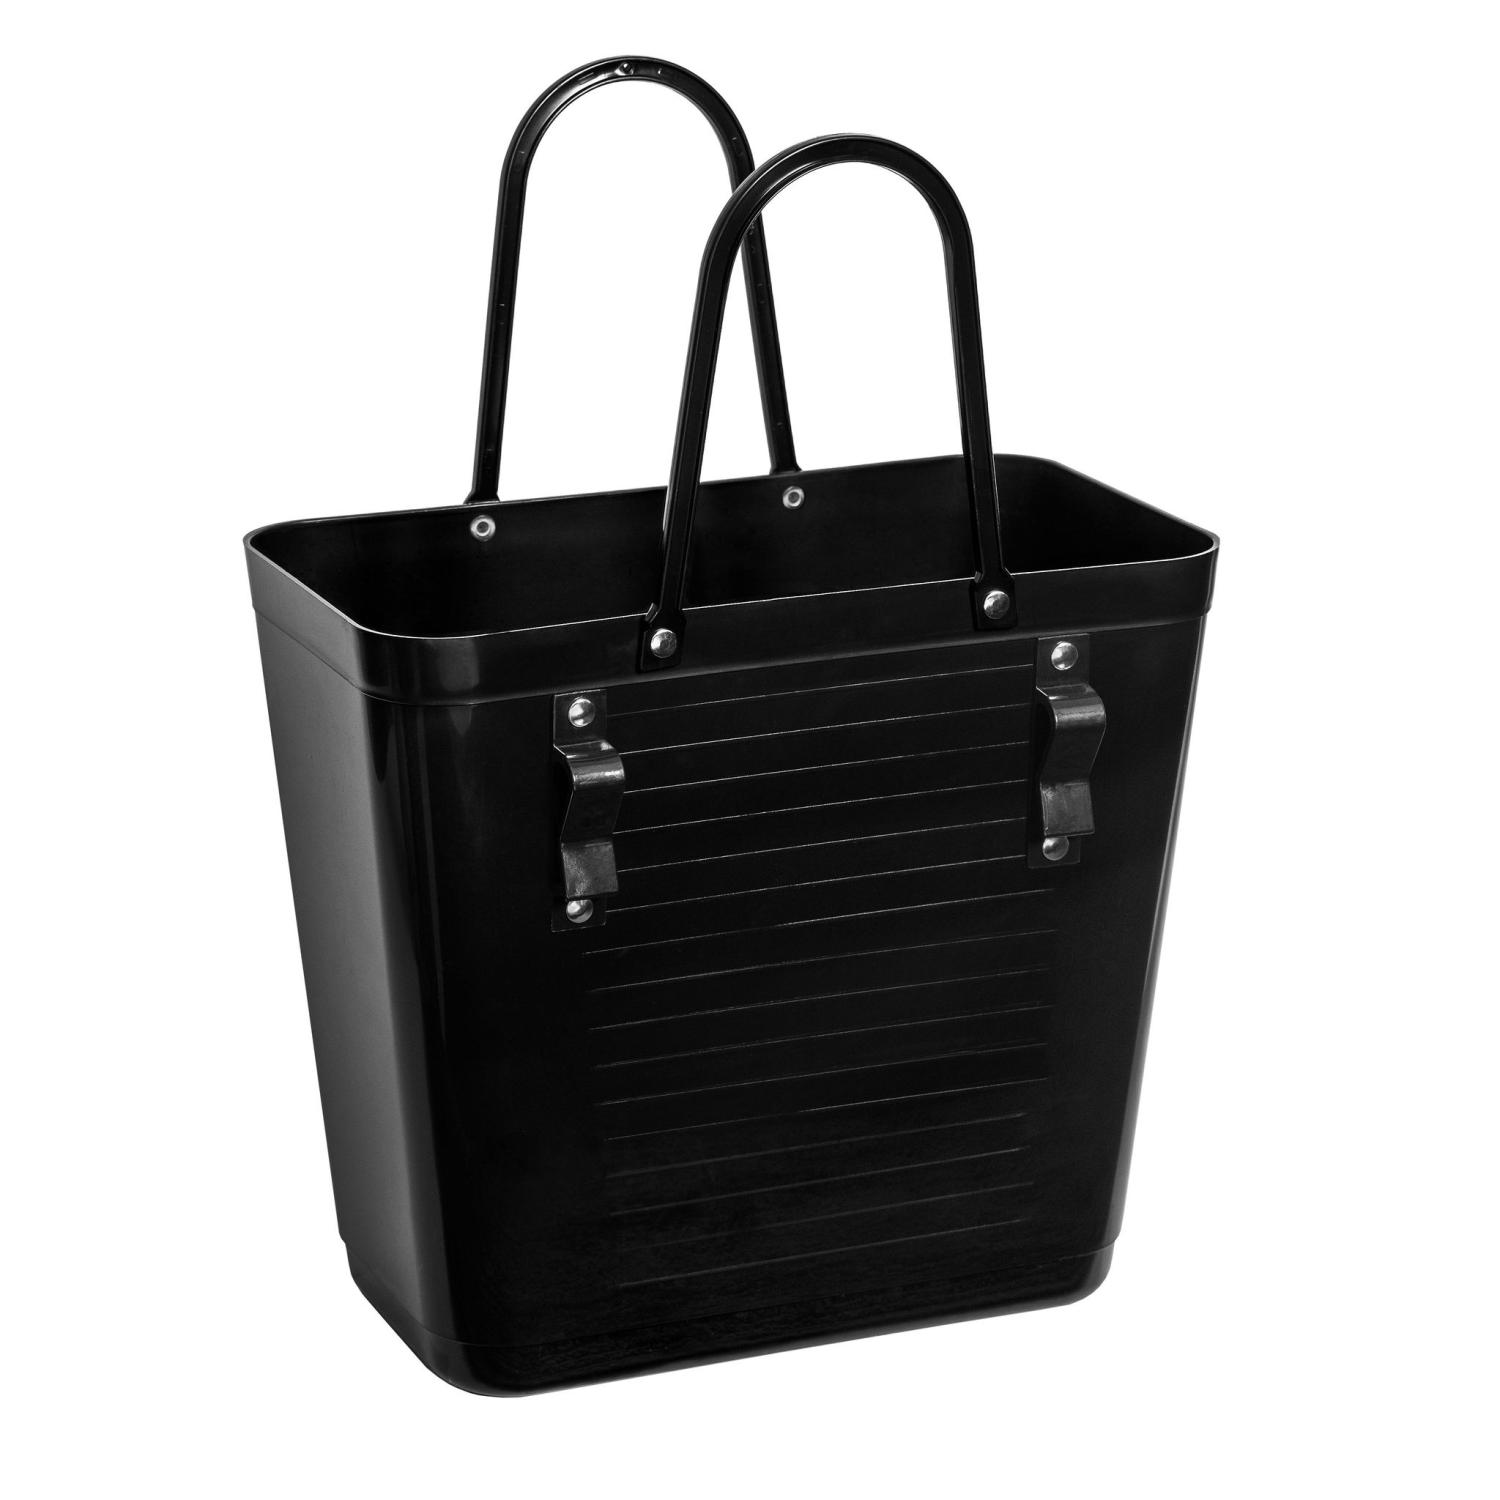 Hinza bag Tall with bicycle hooks, Black - Recycled Plastic